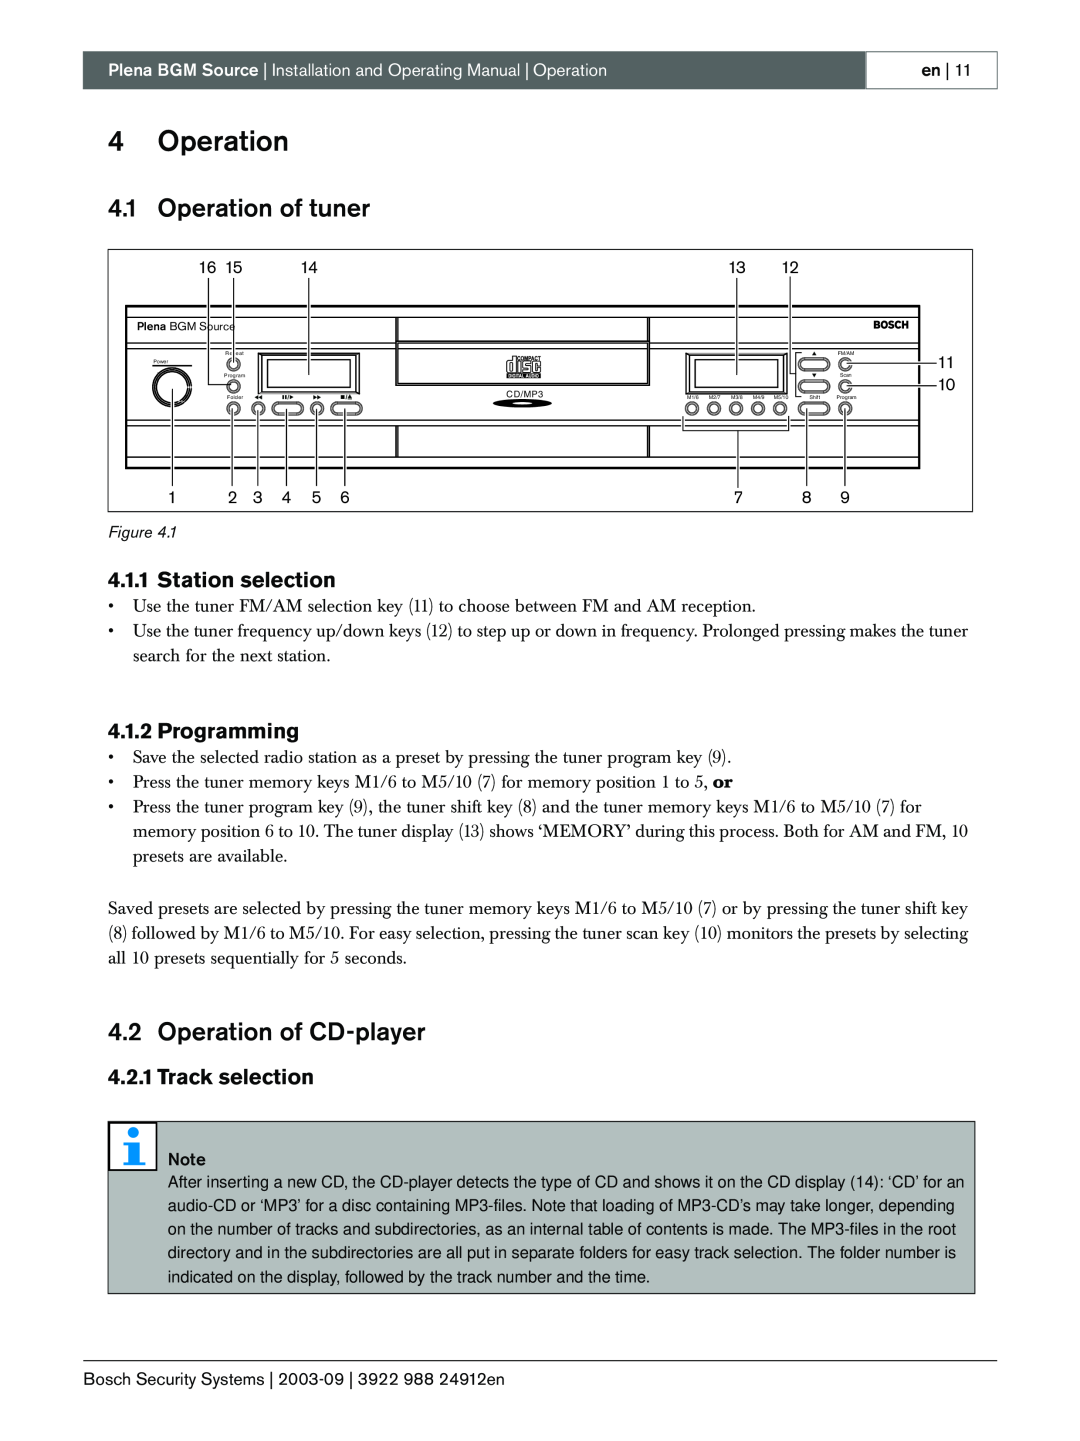 Bosch Power Tools LBB 1961 manual 4Operation, Operation of tuner, Operation of CD-player, Station selection, Programming 